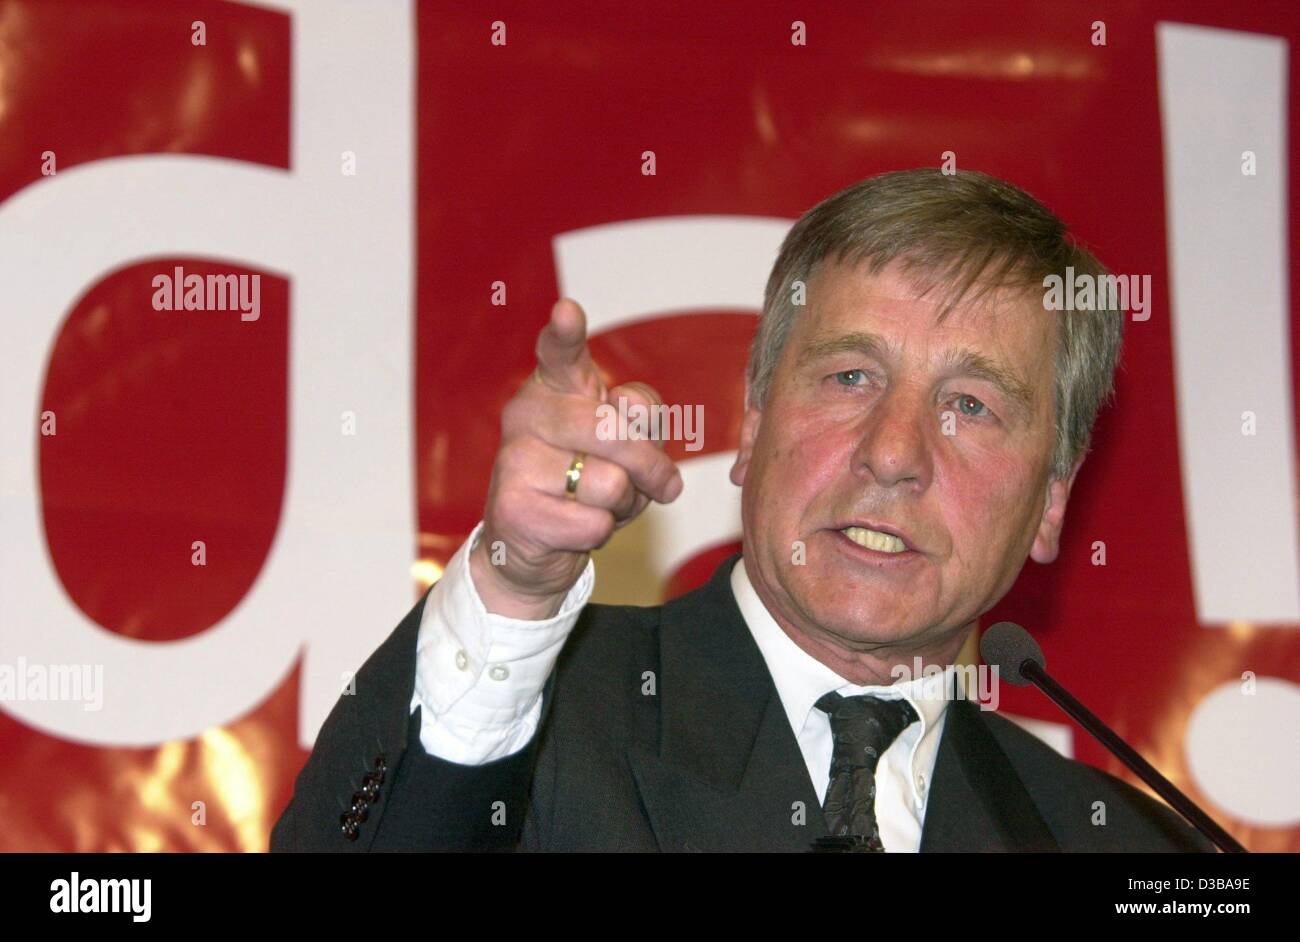 (dpa) - Wolfgang Clement, Premier Minister of the state of North Rhine Westphalia, gestures during a speech at an election campaign event in Duisburg, Germany, 26 May 2002. On 7 October Wolfgang Clement was designated 'superminister' for labour and economics, replacing both the Economic Minister and Stock Photo